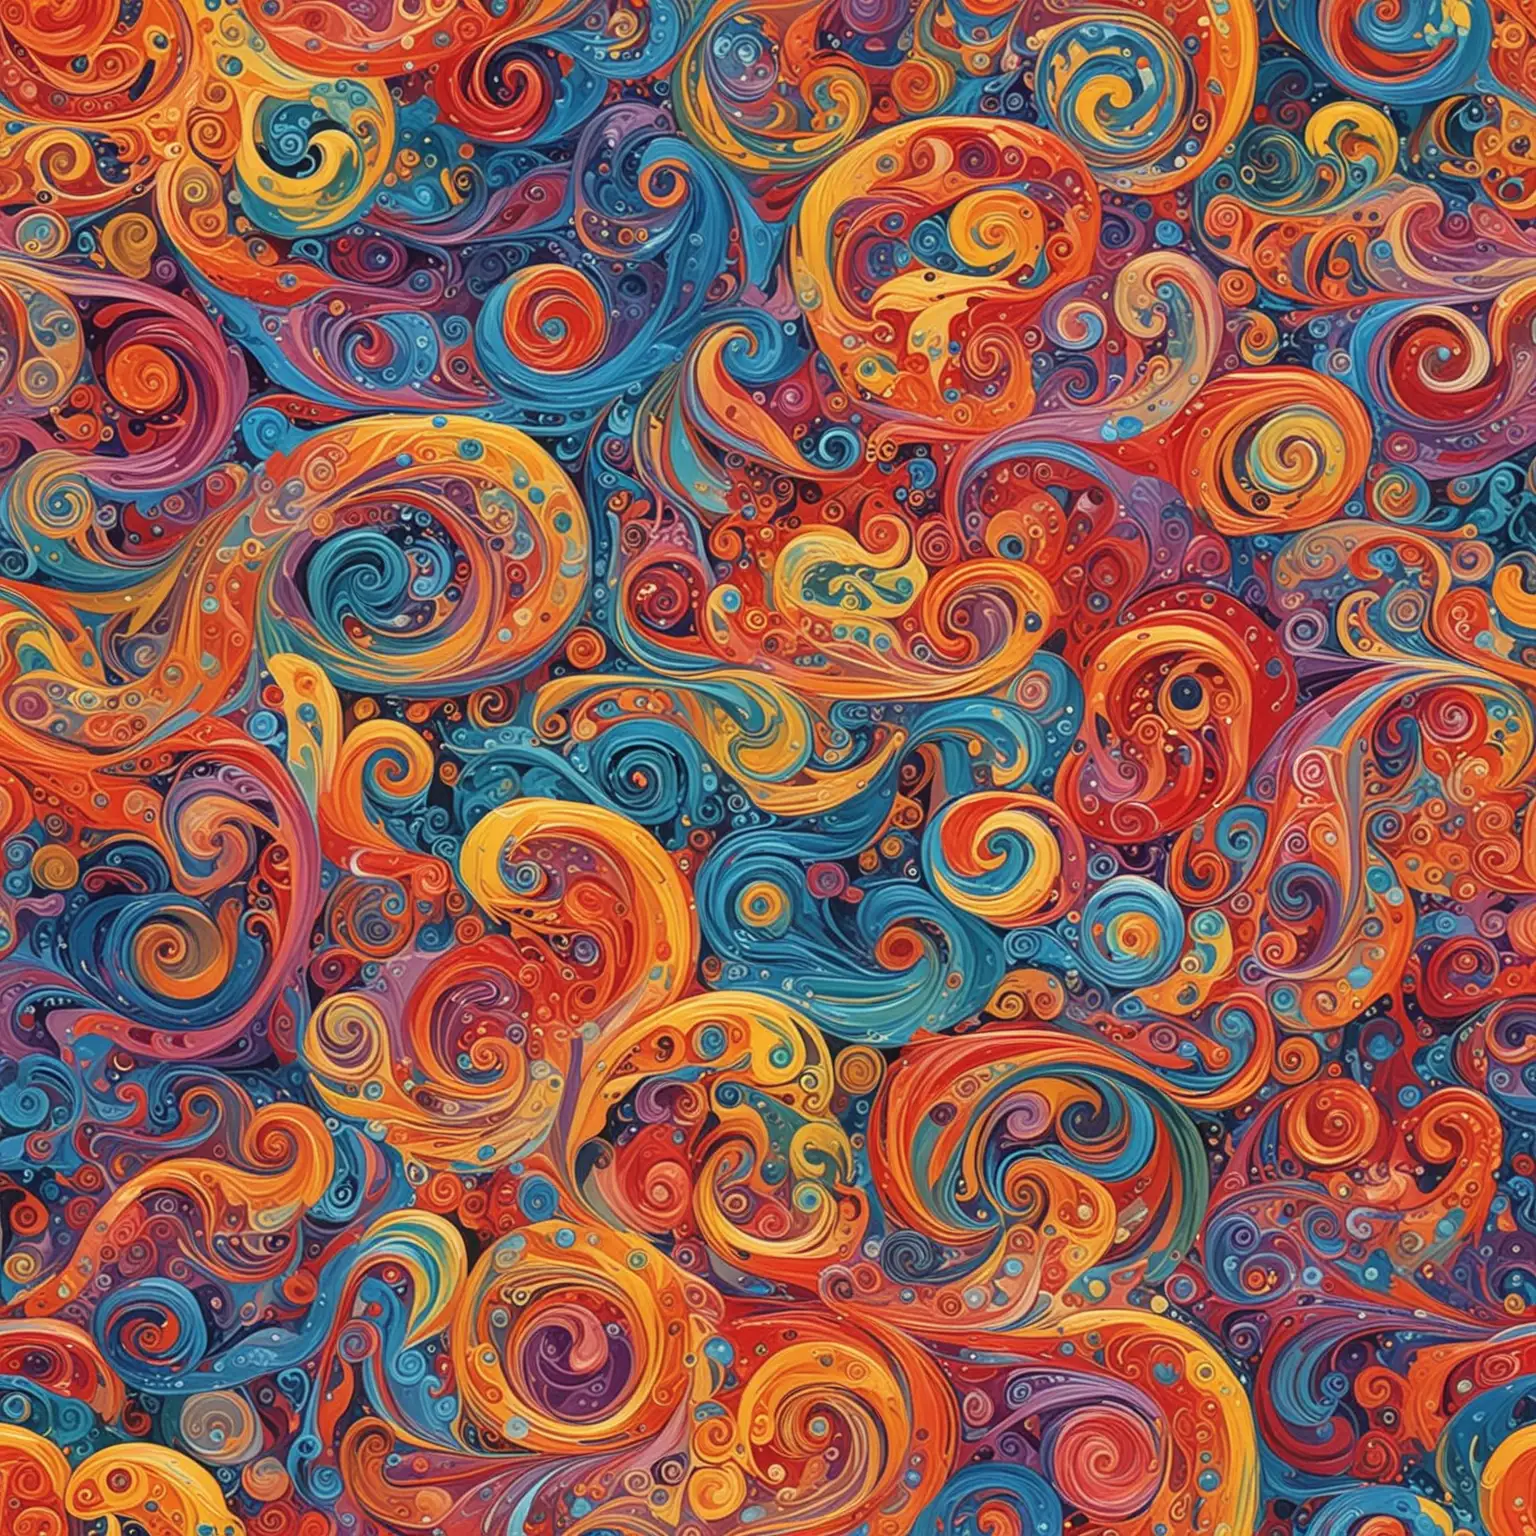 Abstract Swirls of Multicolored Paint